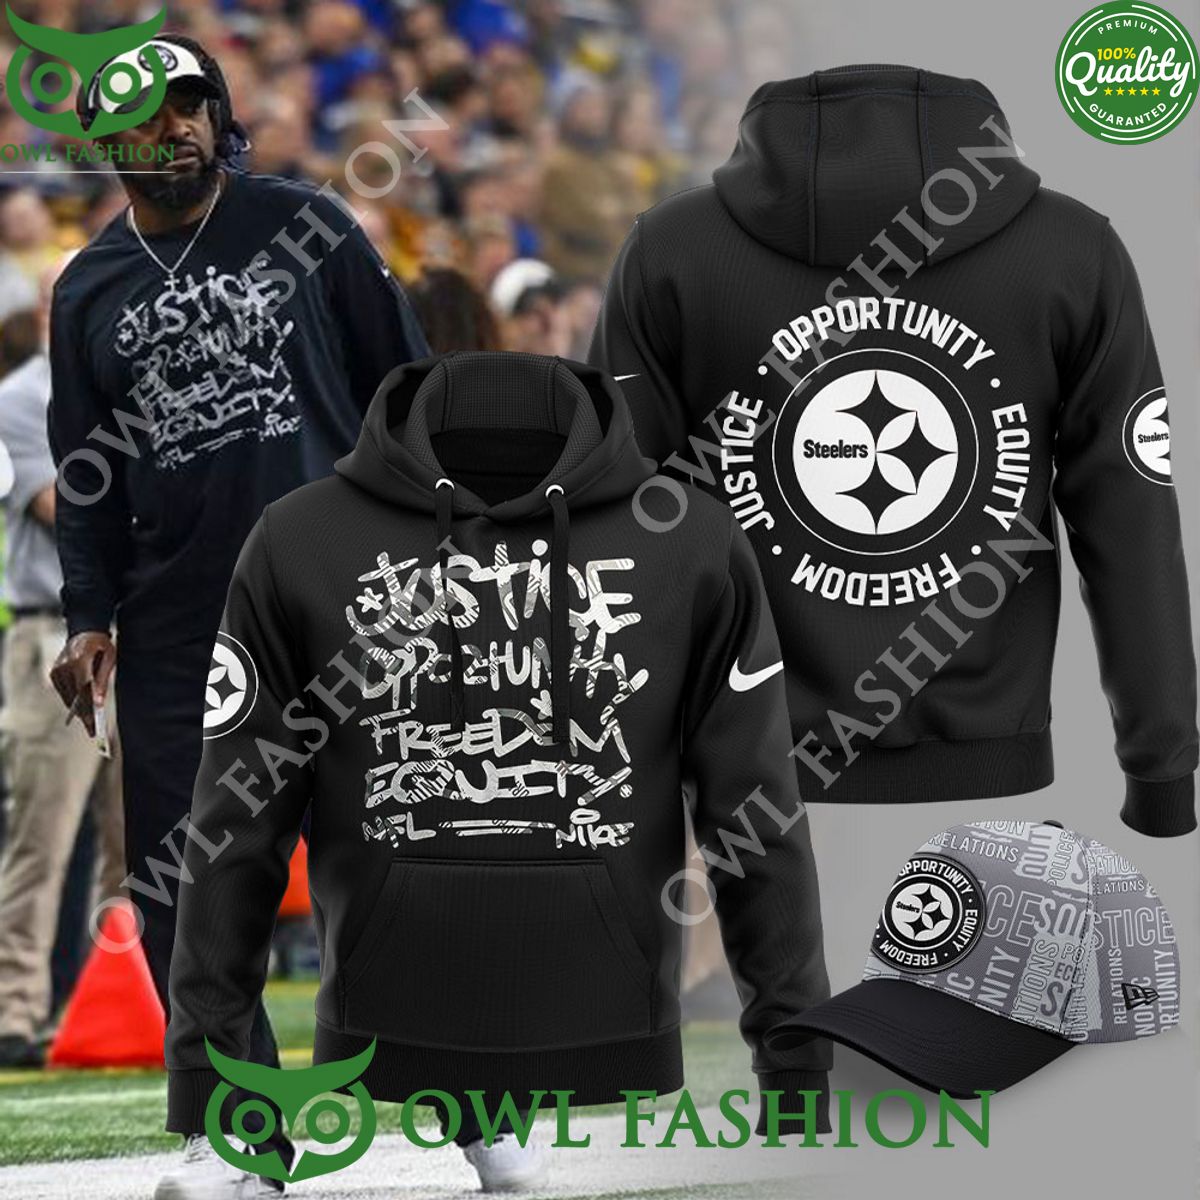 pittsburgh steelers justice opportunity freedom equity 3d hoodie printed only 1 376kw.jpg